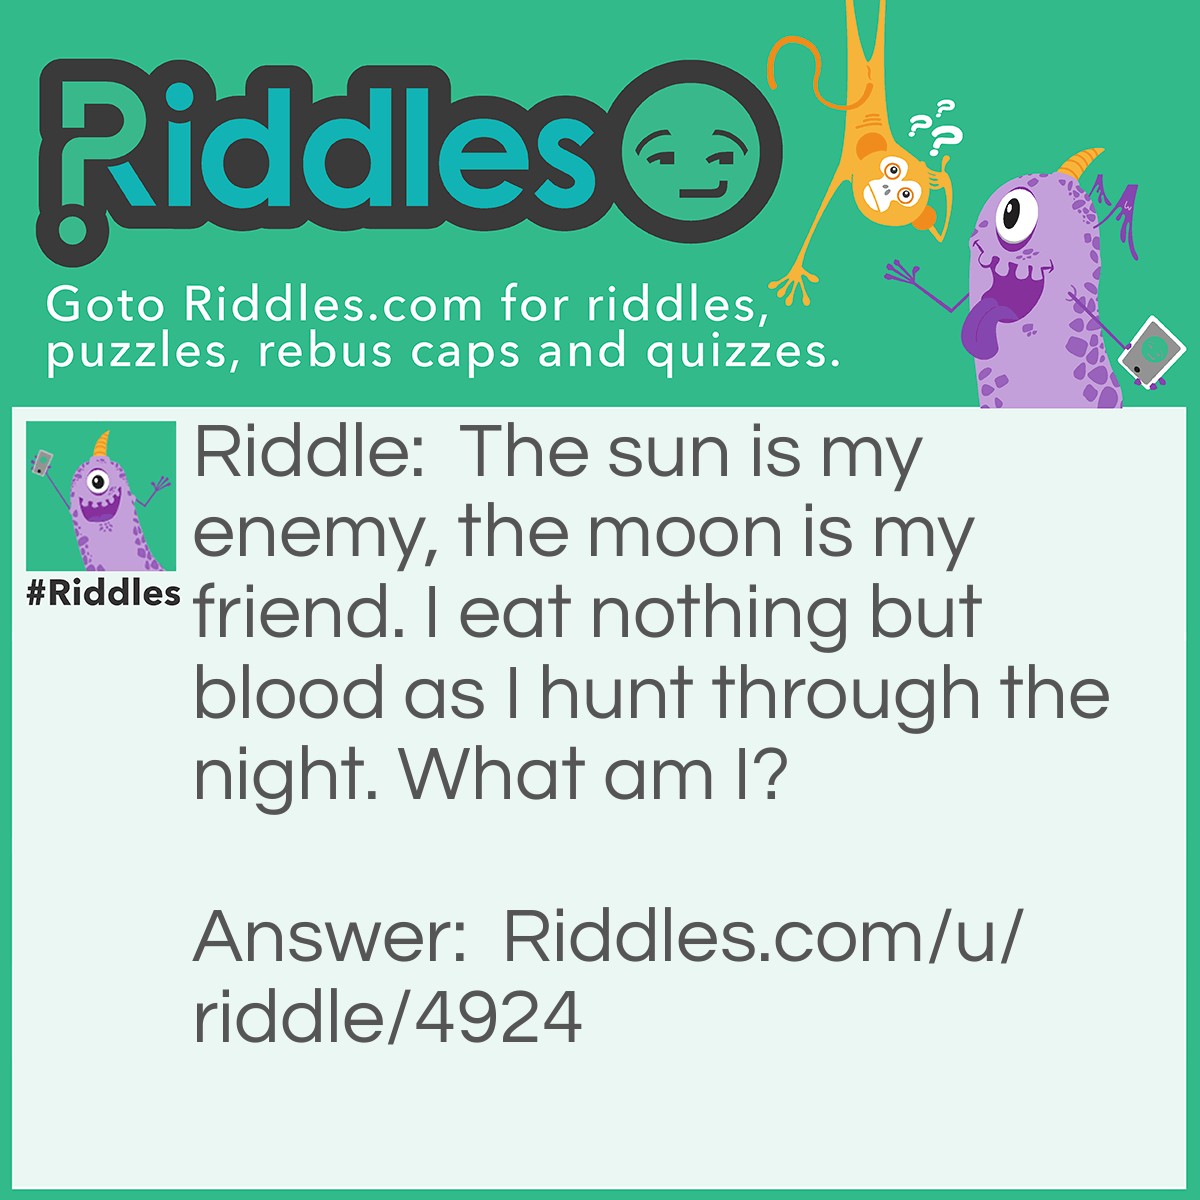 Riddle: The sun is my enemy, the moon is my friend. I eat nothing but blood as I hunt through the night. What am I? Answer: A vampire.